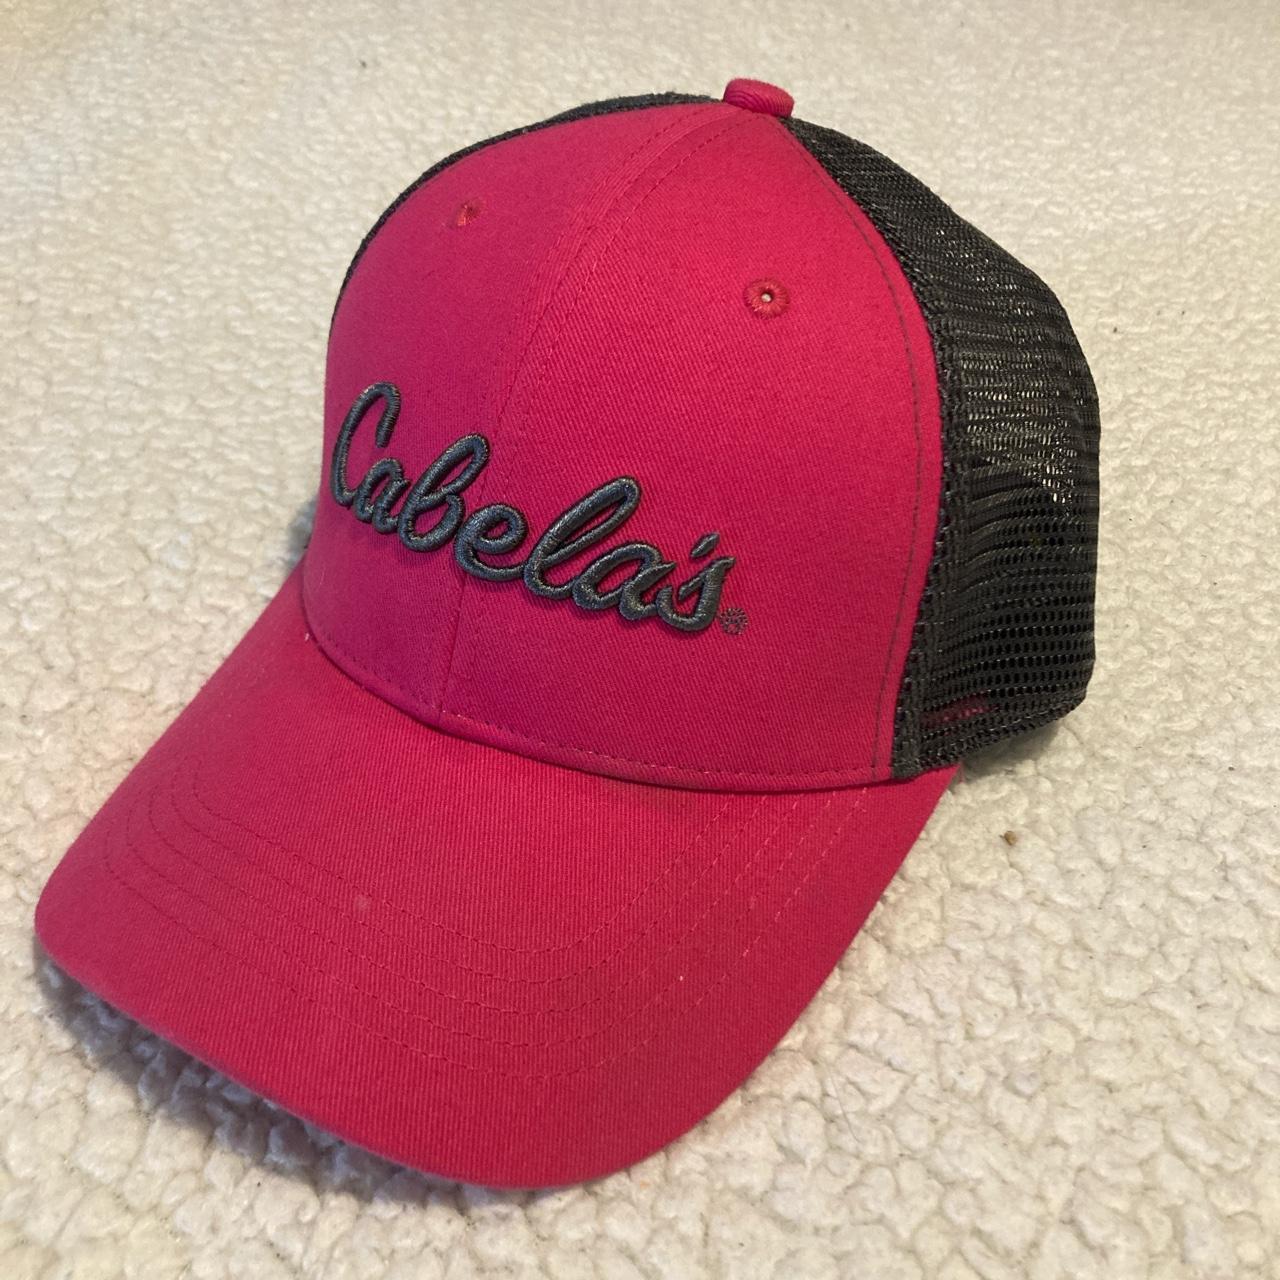 Pink and charcoal Cabelas trucker style mesh